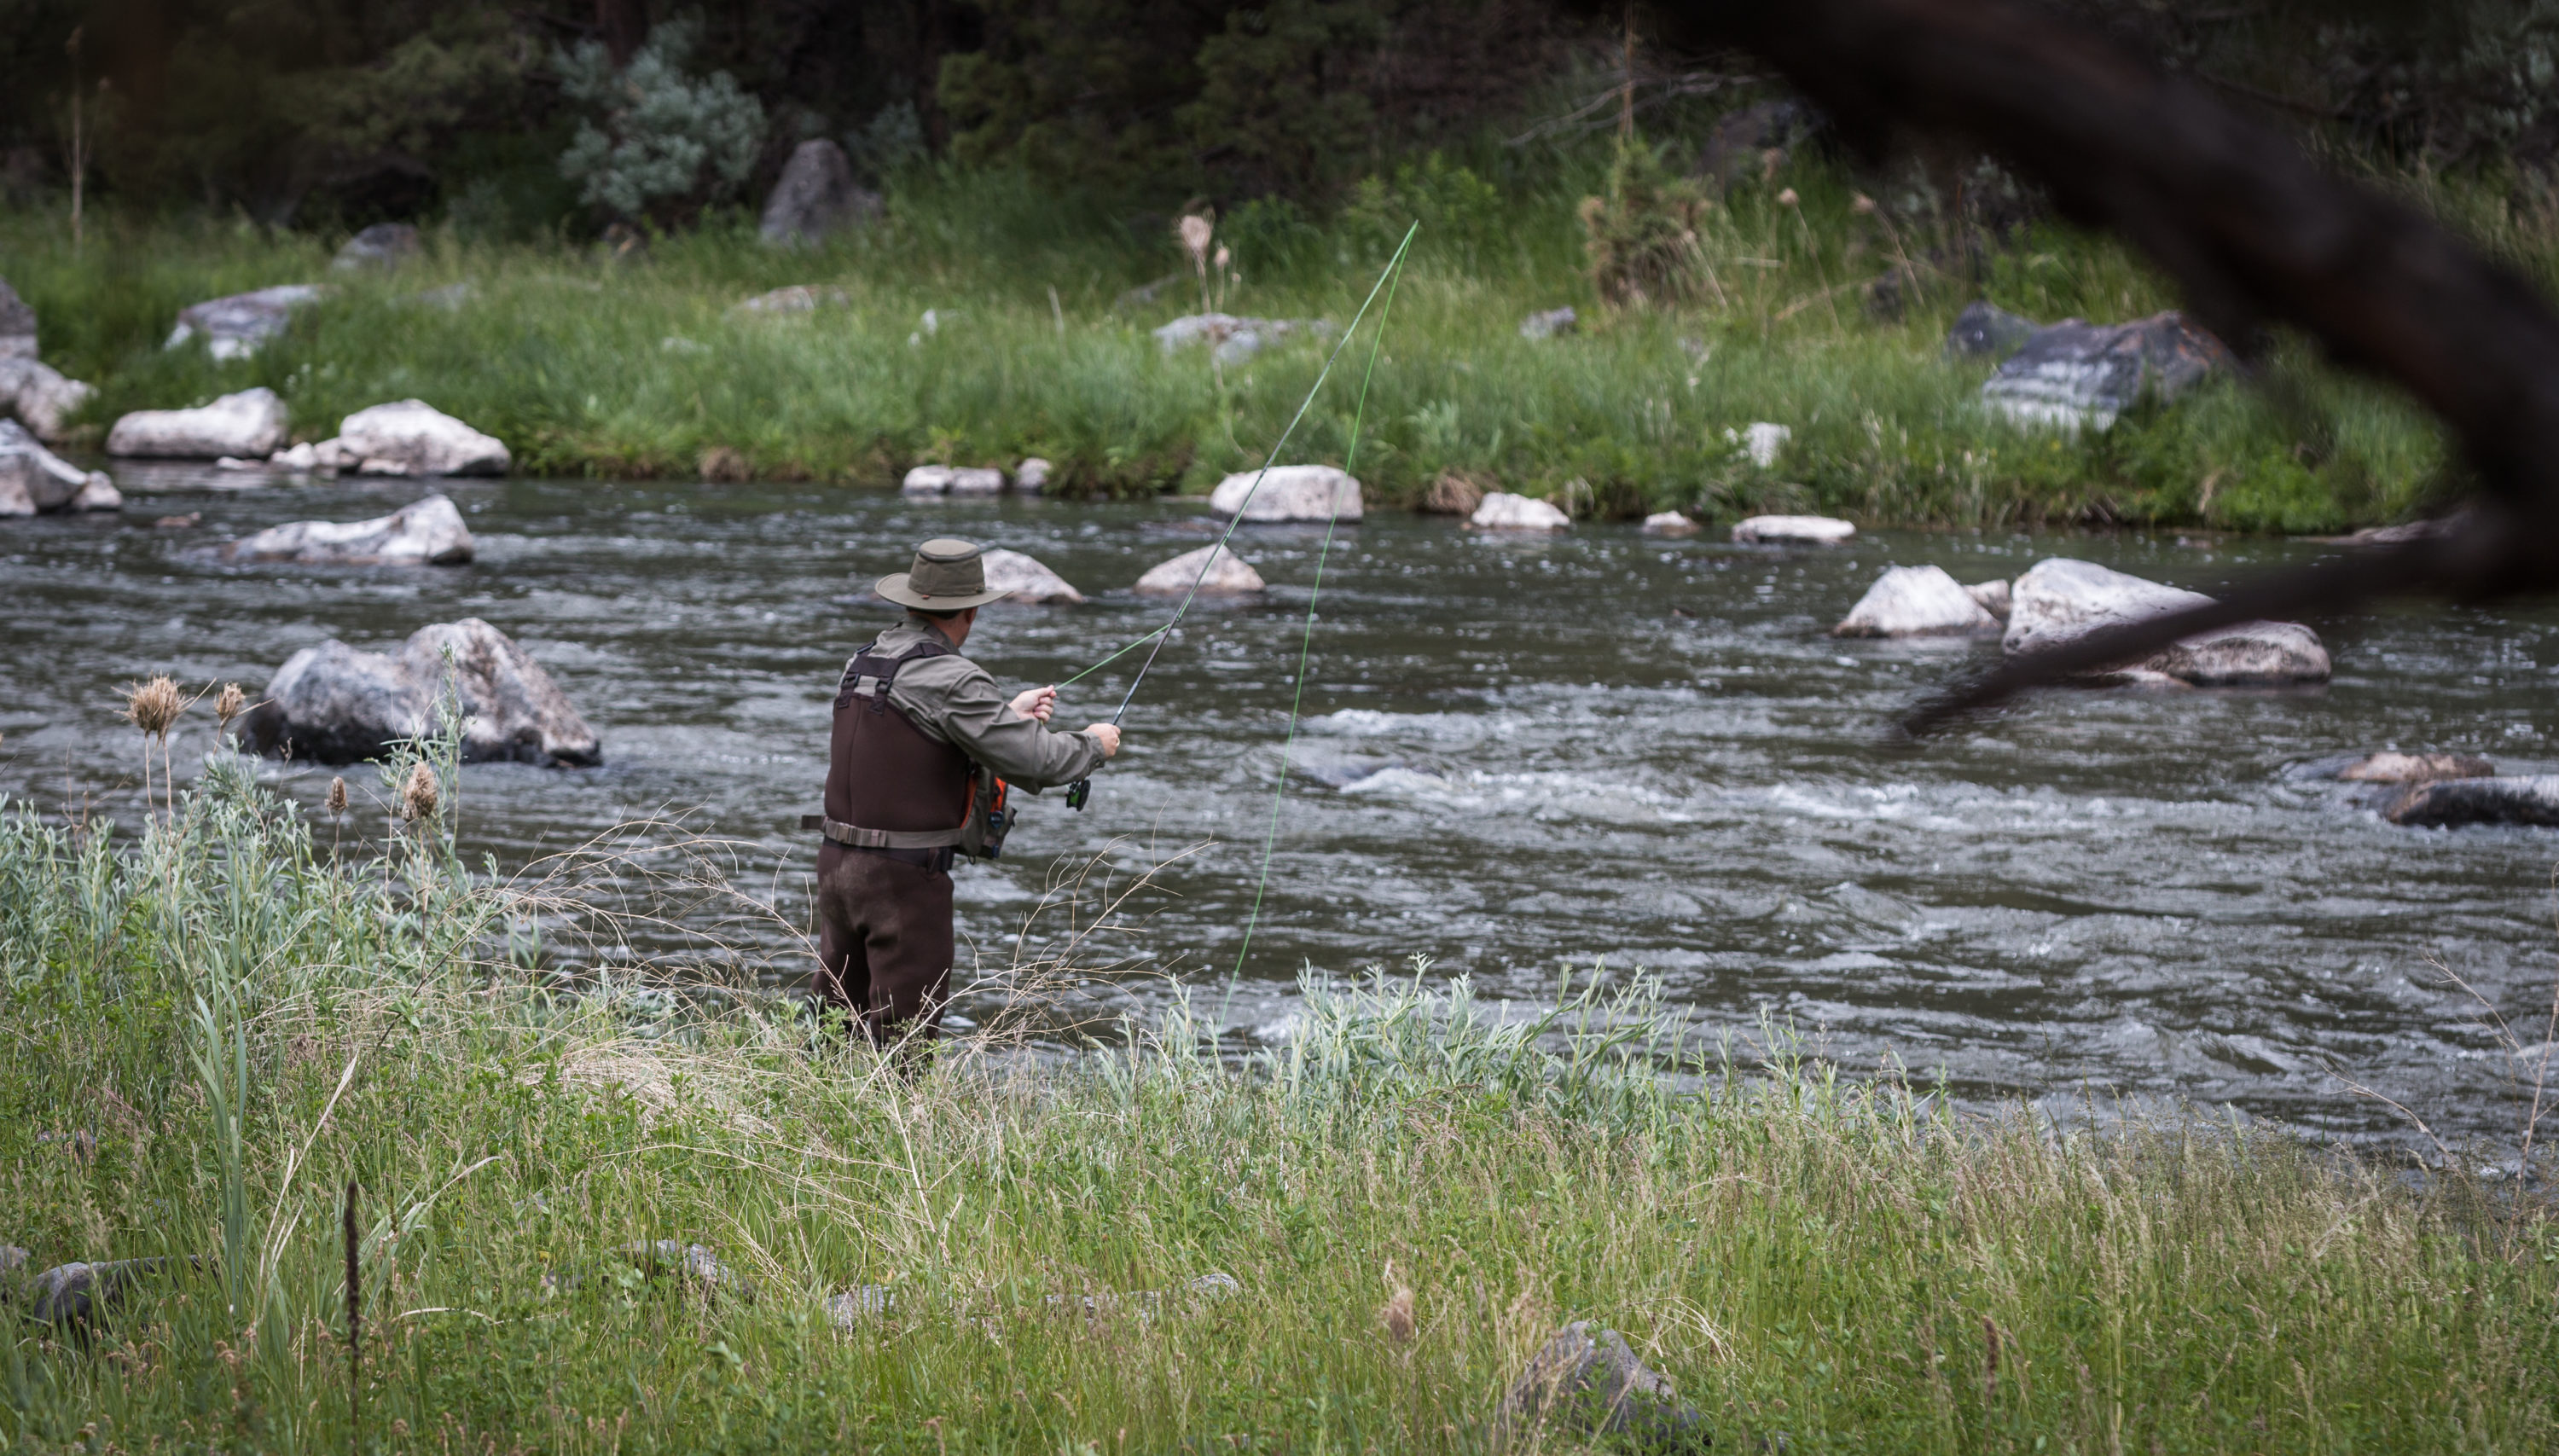 https://commons.wikimedia.org/wiki/File:Fly_fishing_on_the_Crooked_Wild_and_Scenic_River_(35617171264).jpg